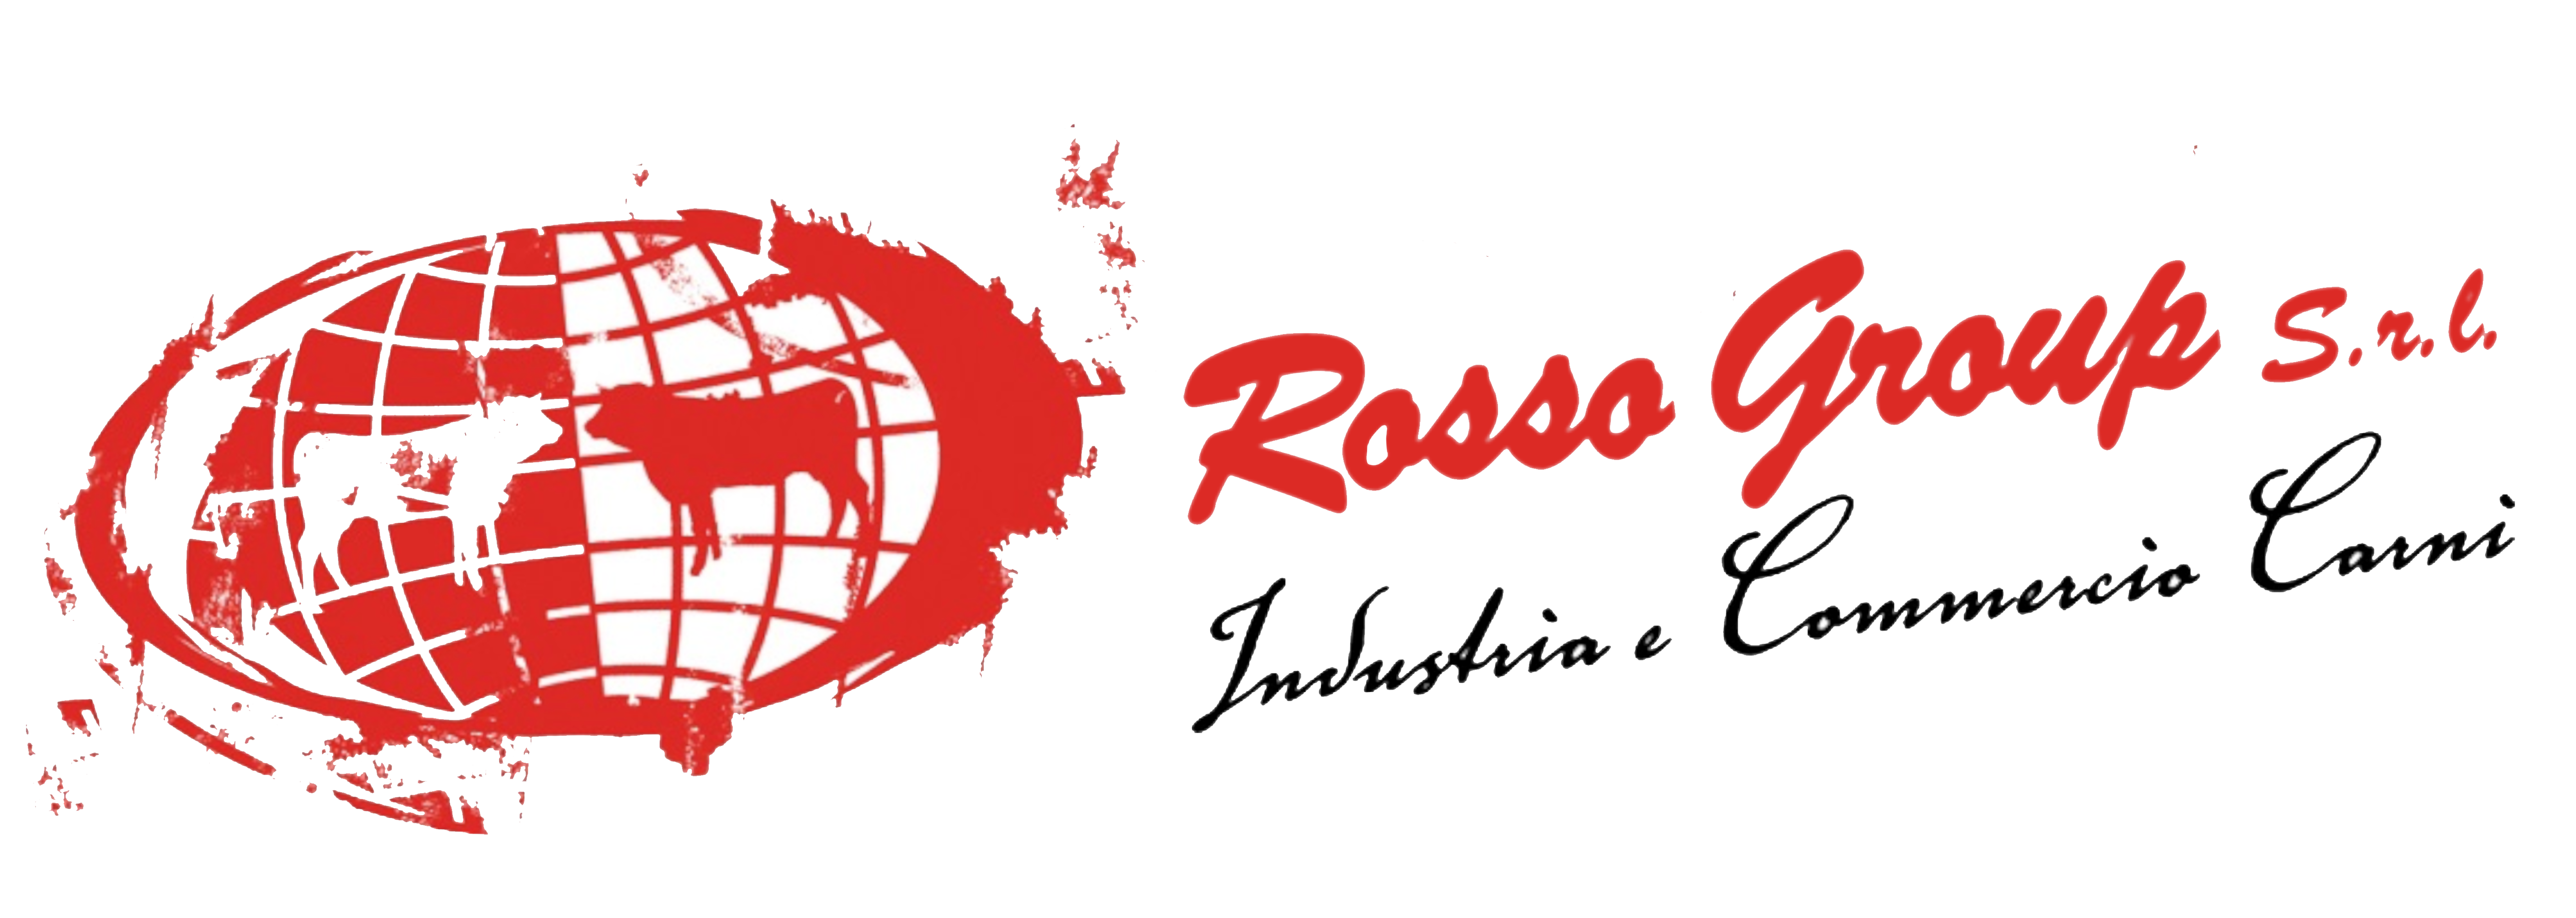 Rosso Group Srl